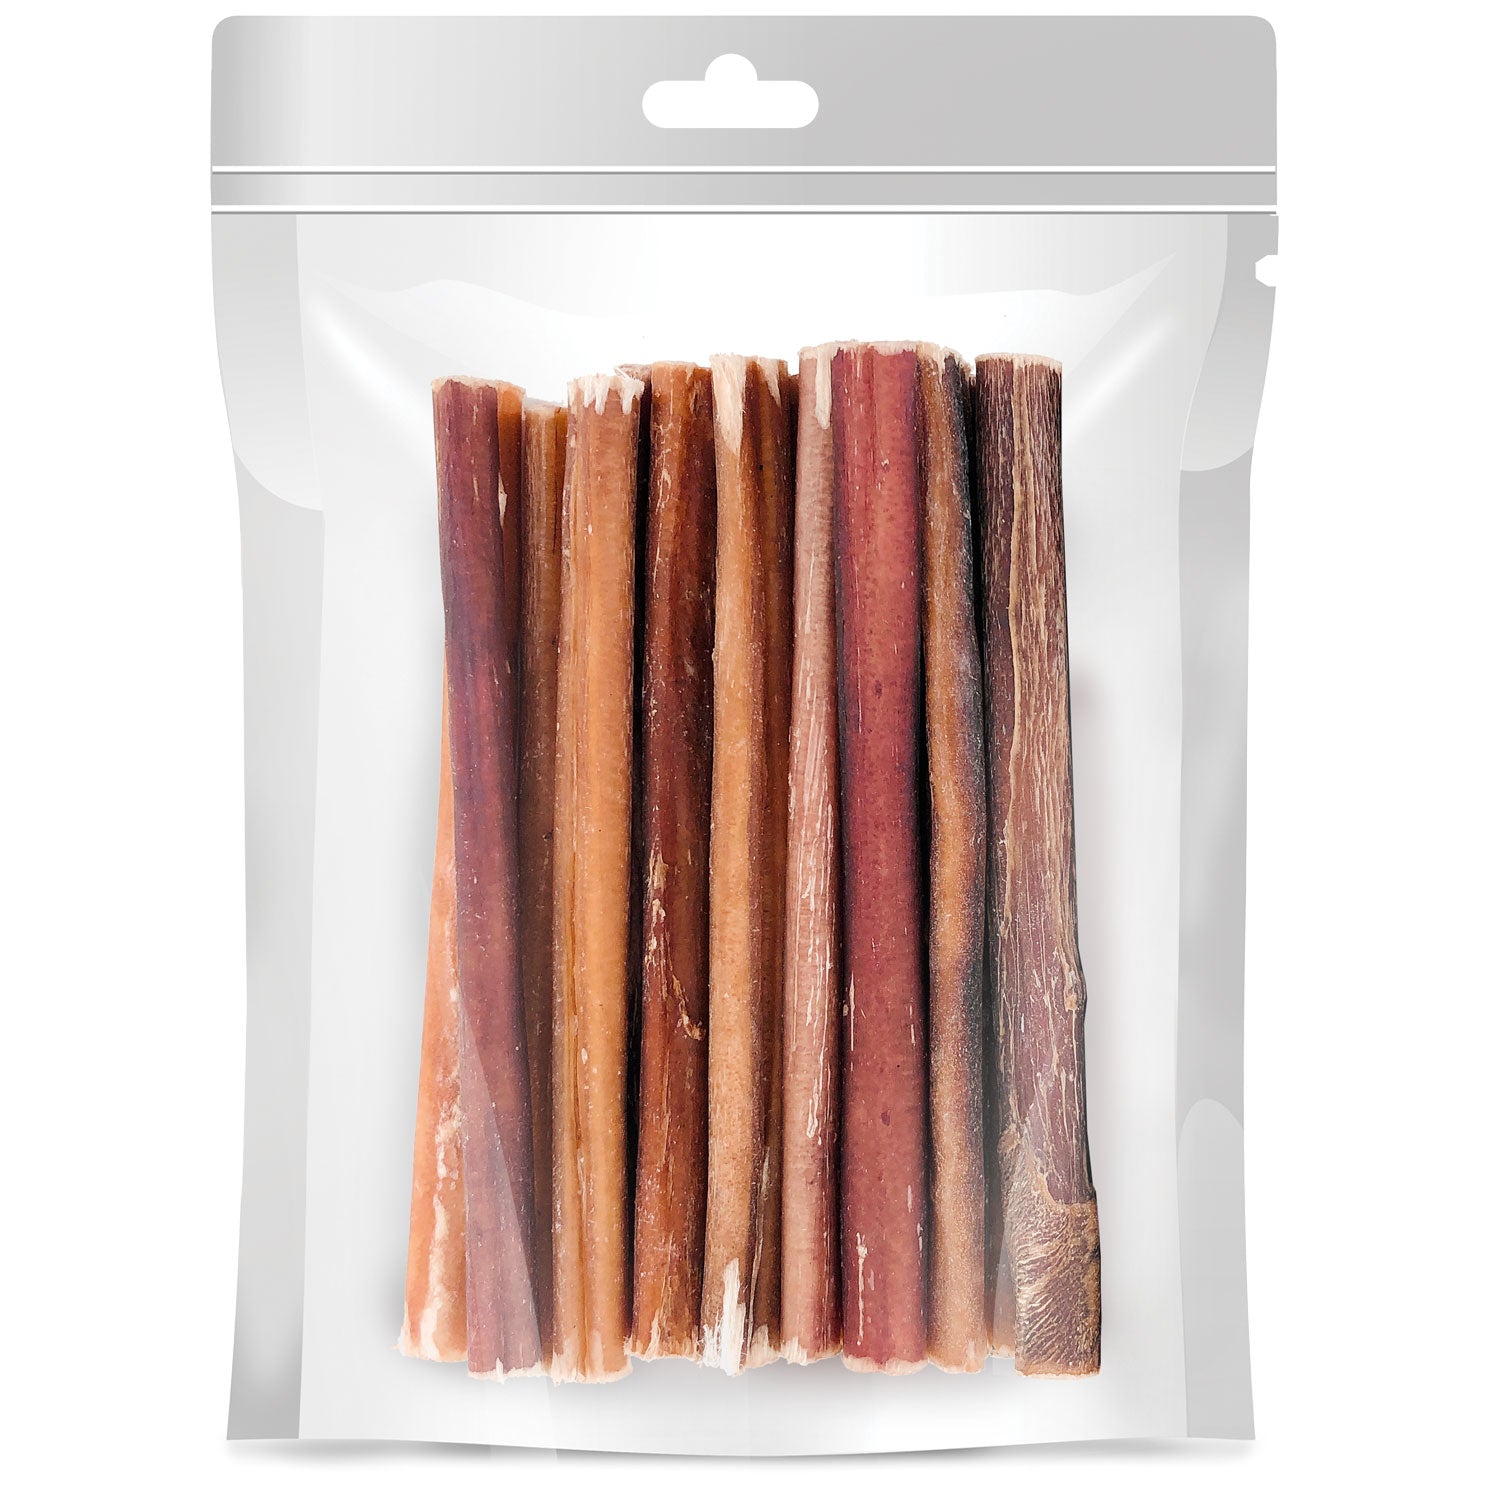 ValueBull Bully Sticks for Small Dogs, Thin 6 Inch, 400 Count RESALE PACKS (40 x 10 Count)